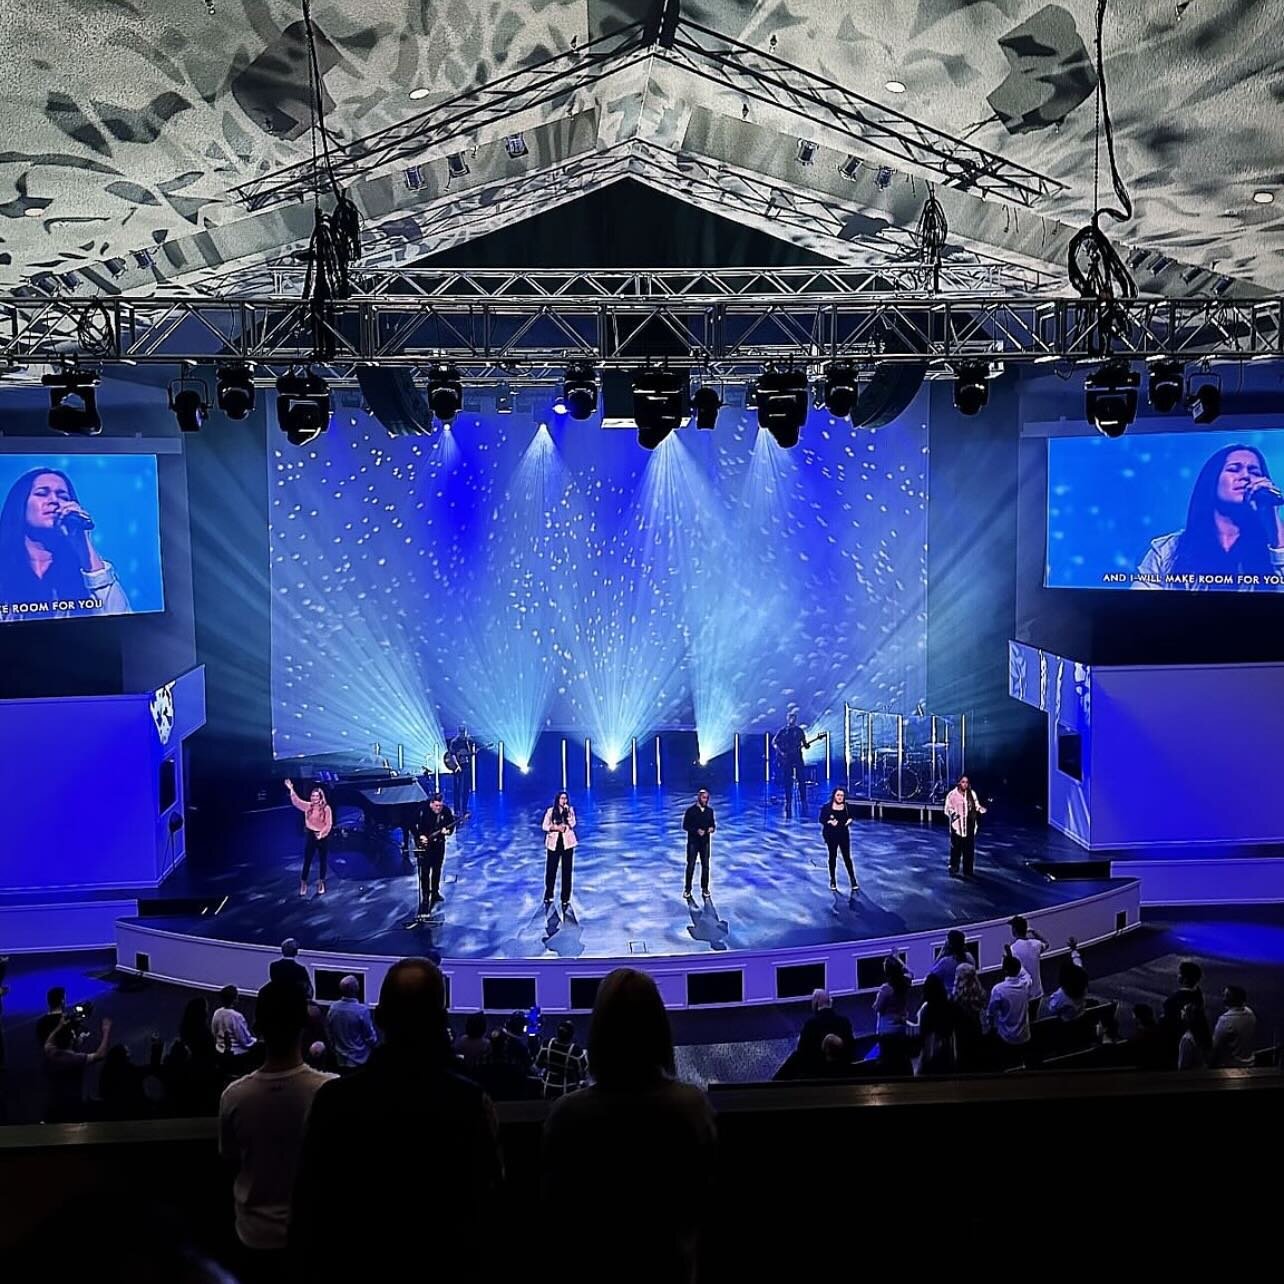 Something special is happening at @lc.church right now. So thankful for the faithfulness of Jesus in and through every season. 

What a joy to be a part.

📸: @brandon_hjelseth_pnw